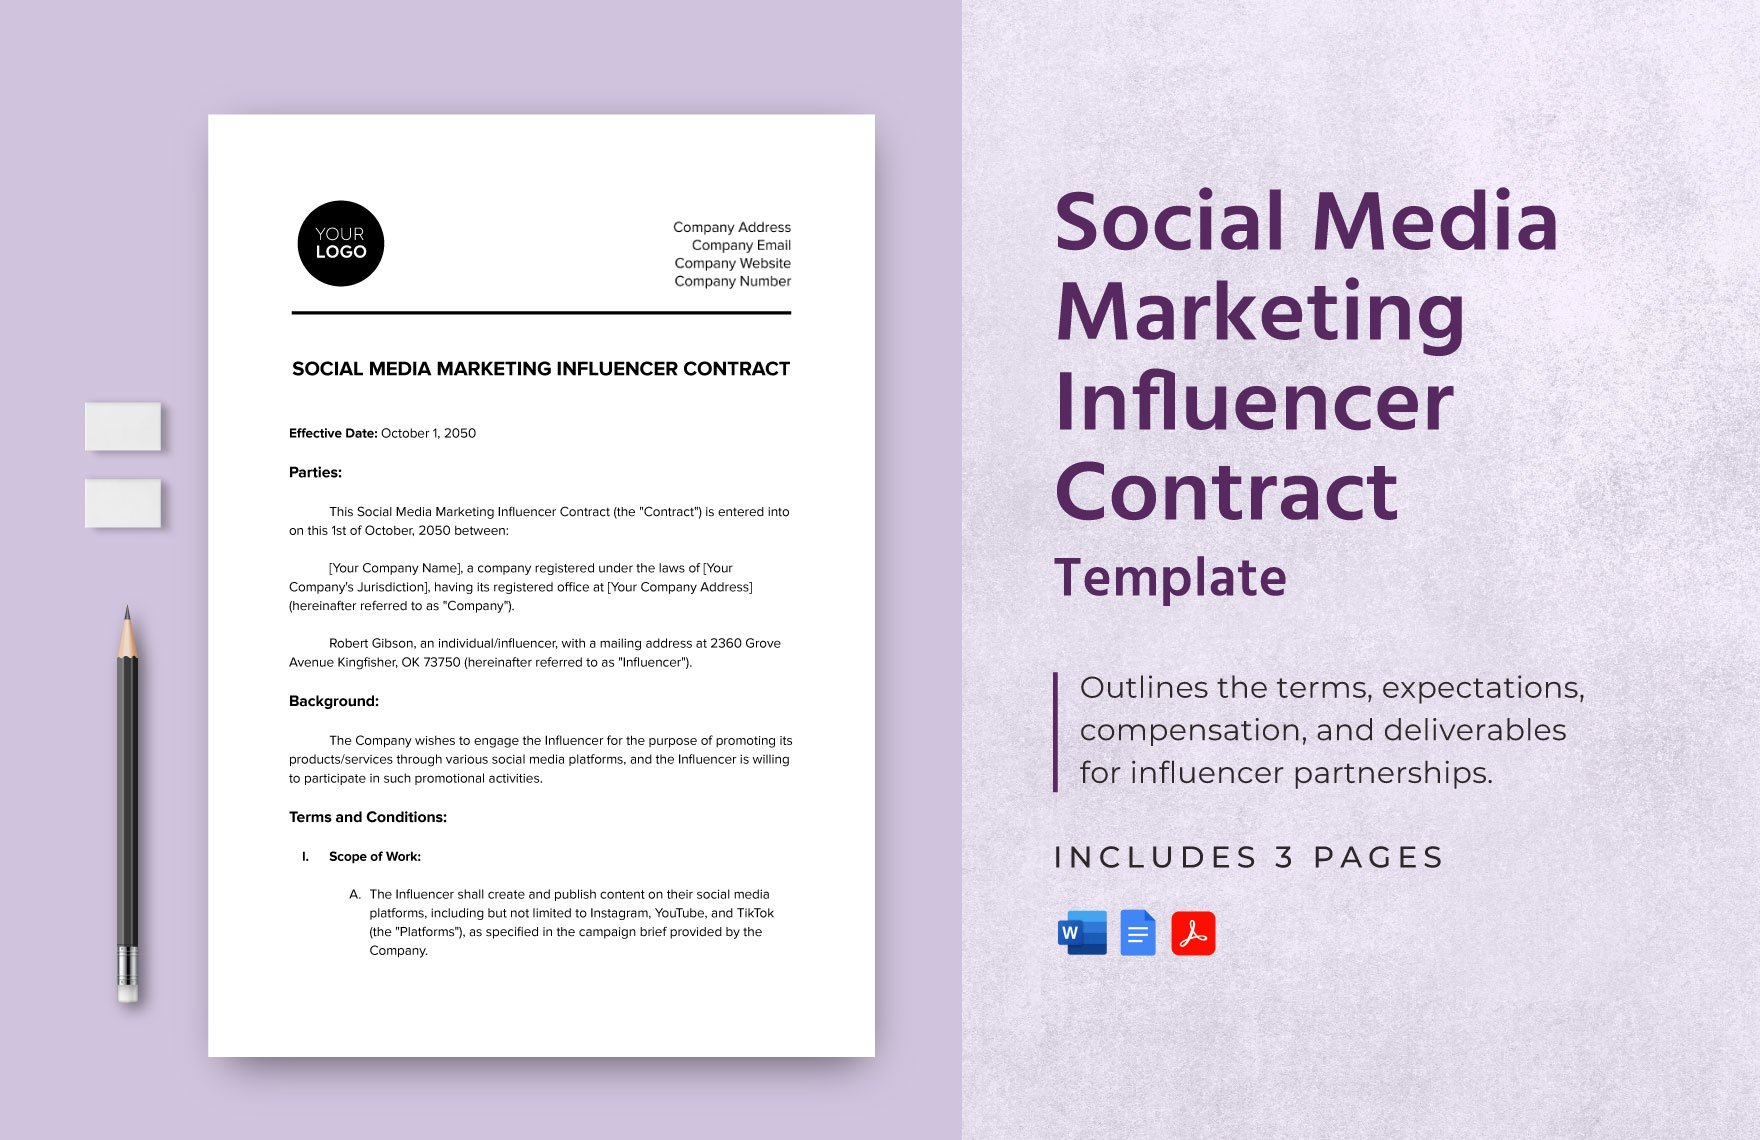 Social Media Marketing Influencer Contract Template